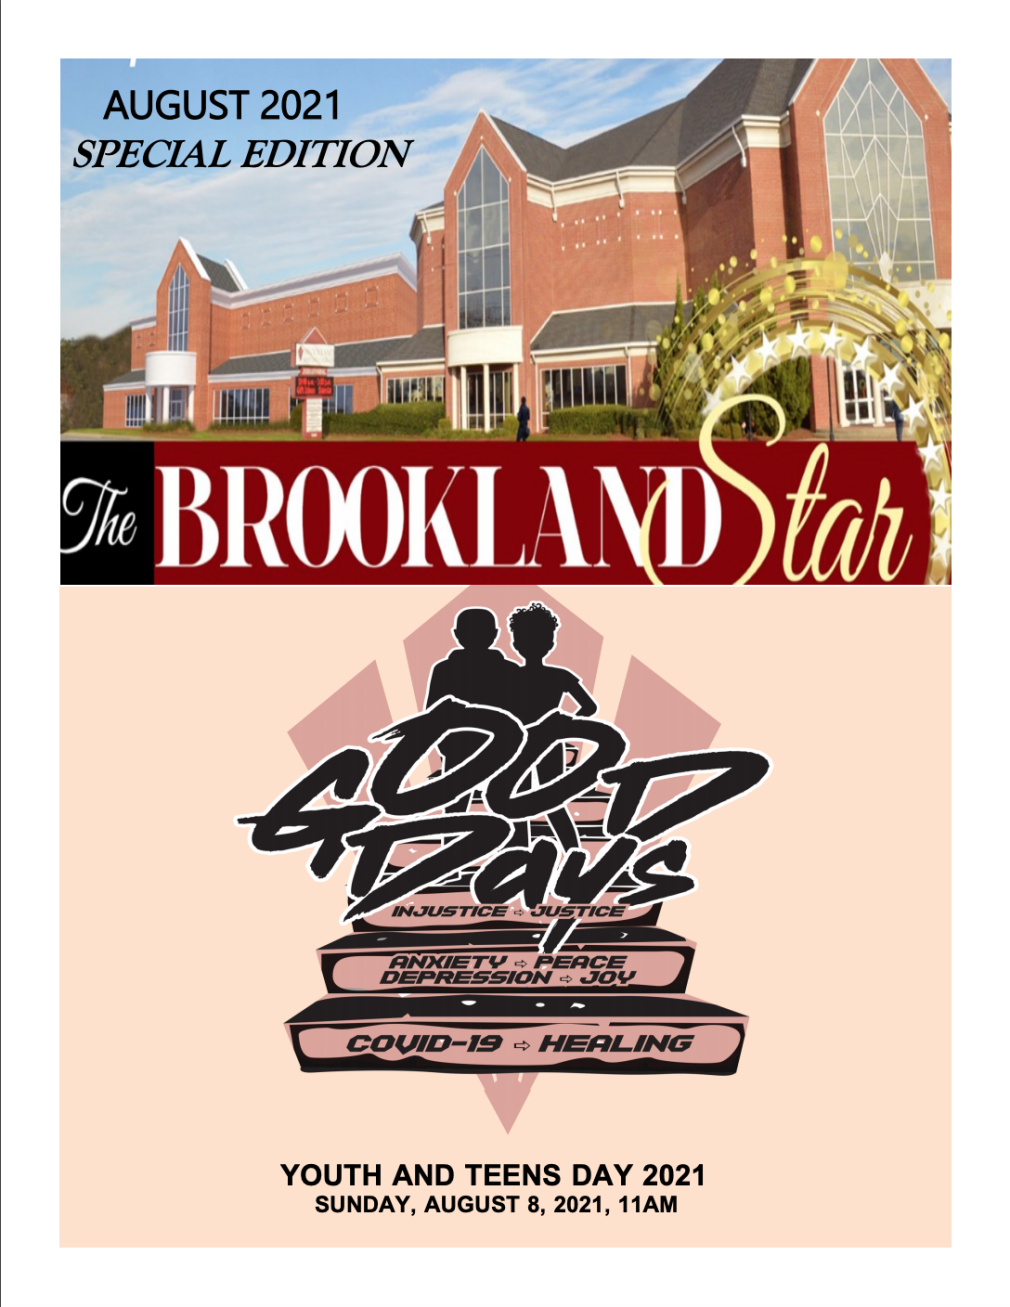 The Brookland Star August 2021 Edition